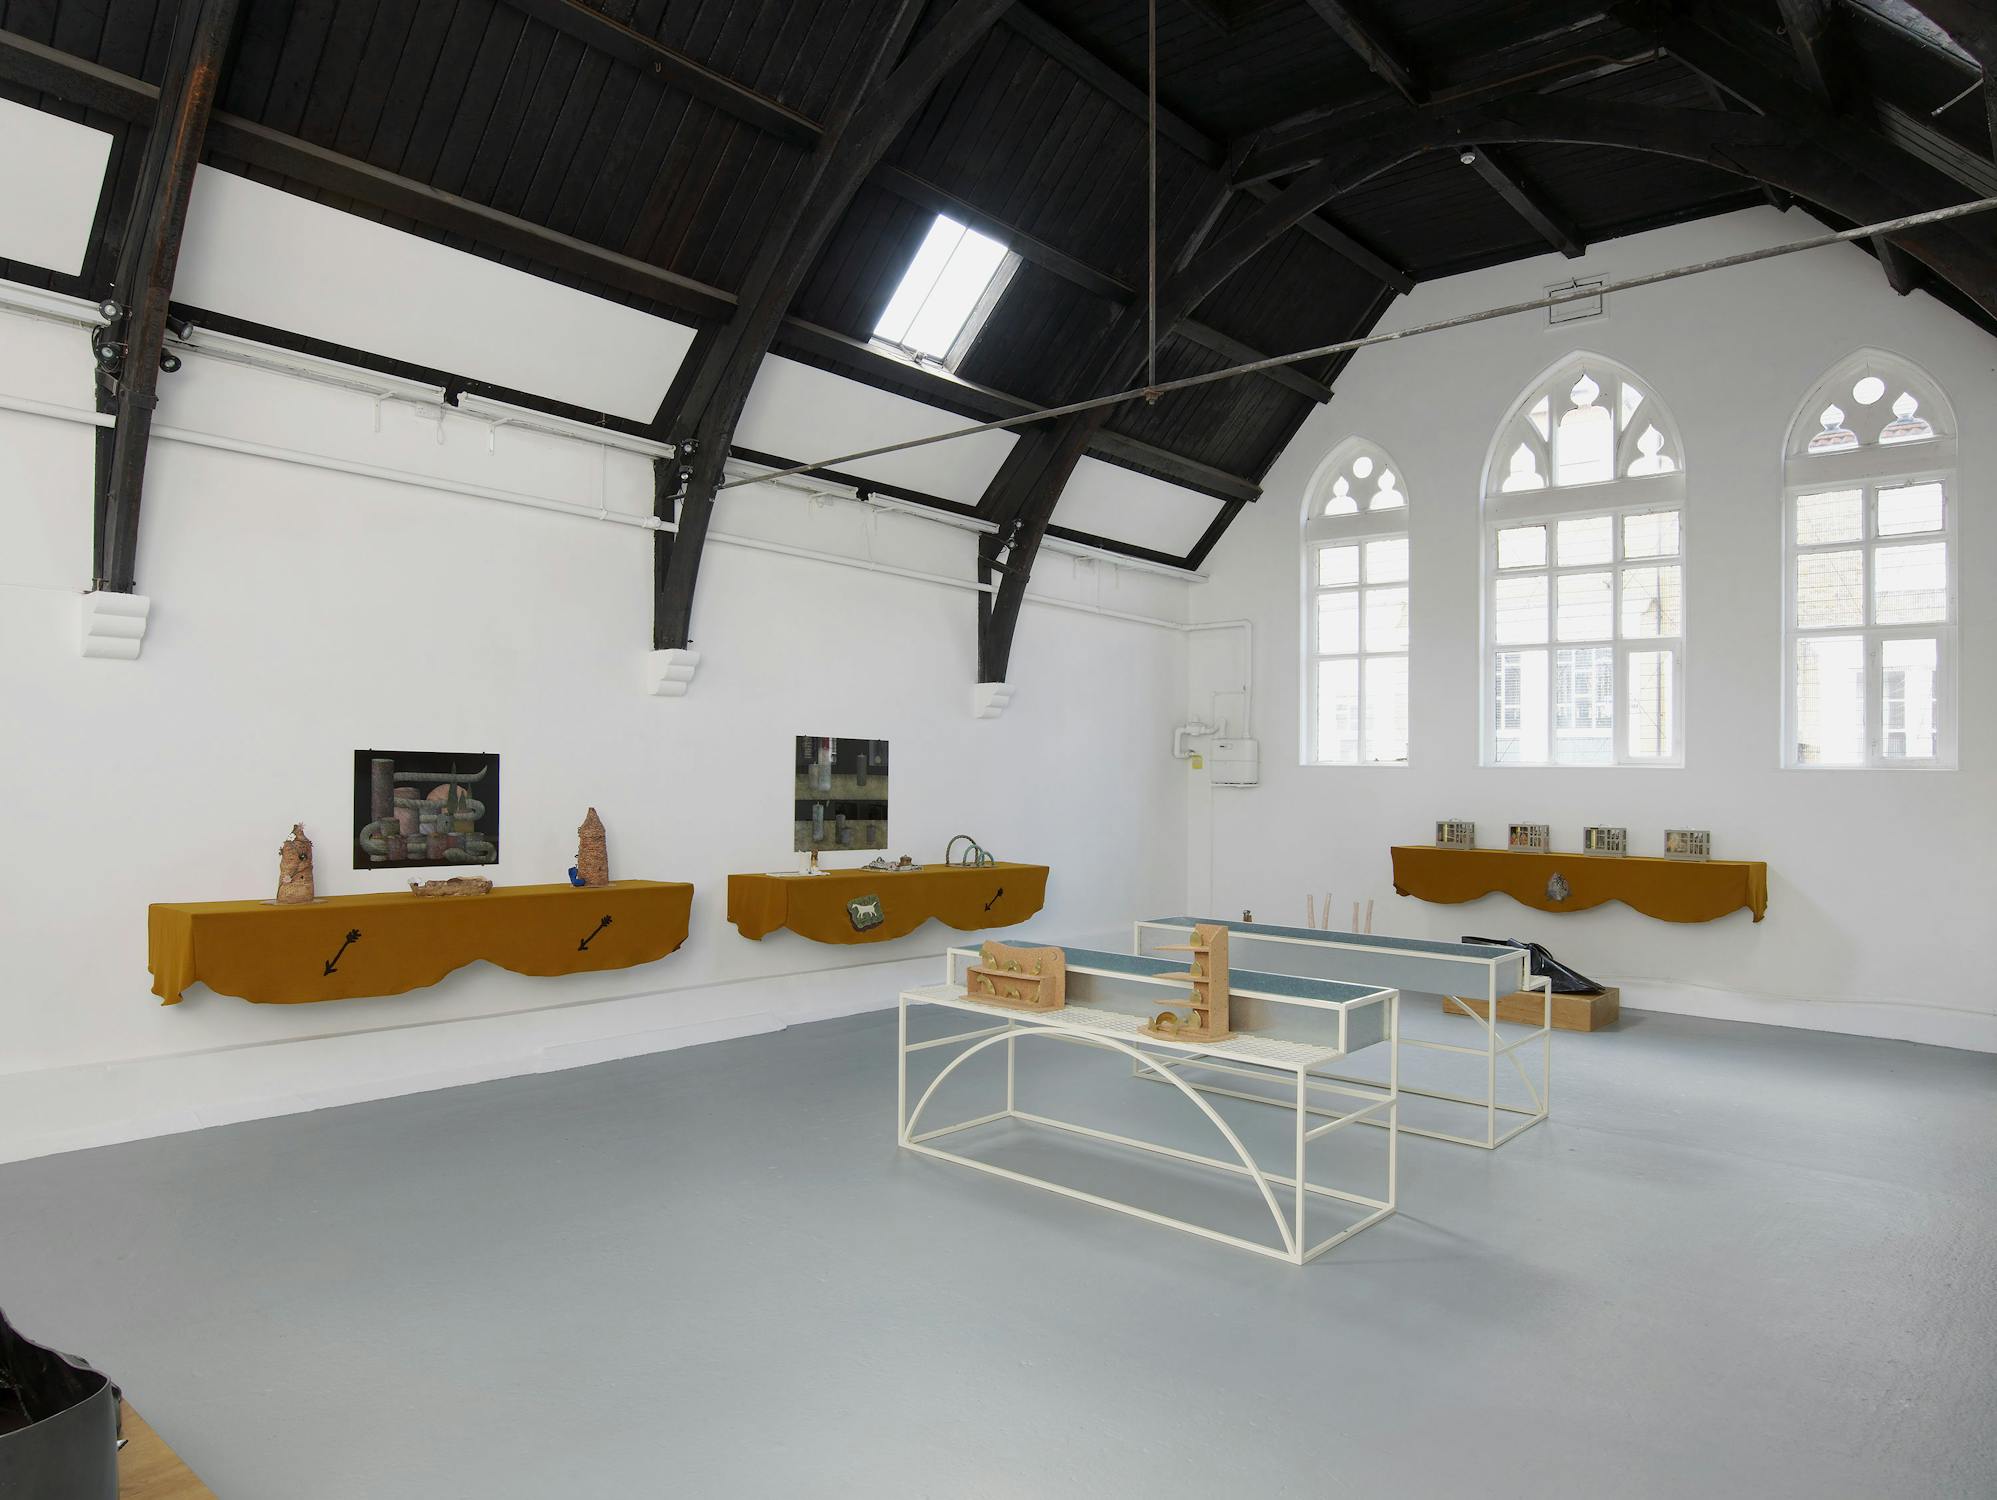 A gallery space with white walls, three large chapel windows and a grey floor. Shelves draped with brown fabric are mounted on the walls, displaying various objects. In the middle of the room, two white framed vitrines display different ceramic objects.